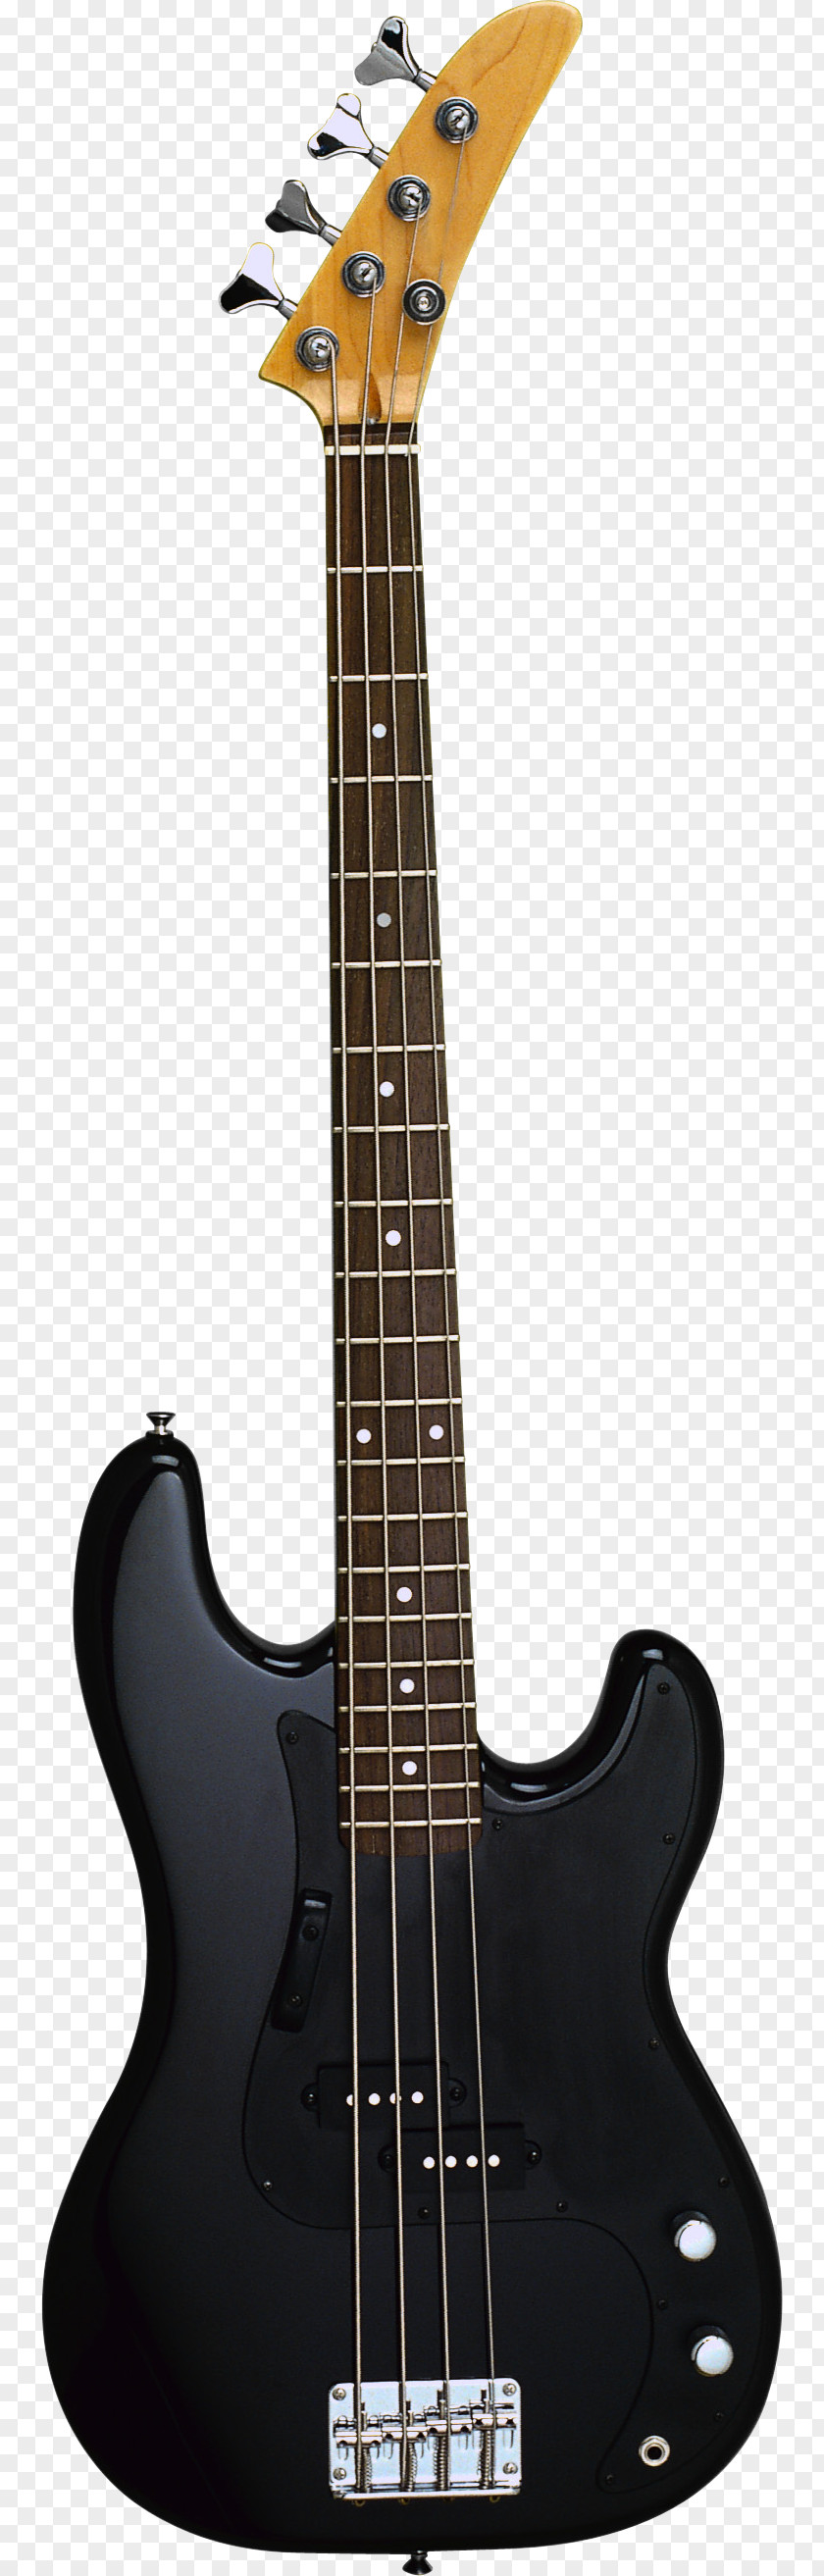 Electric Guitar Musical Instrument PNG